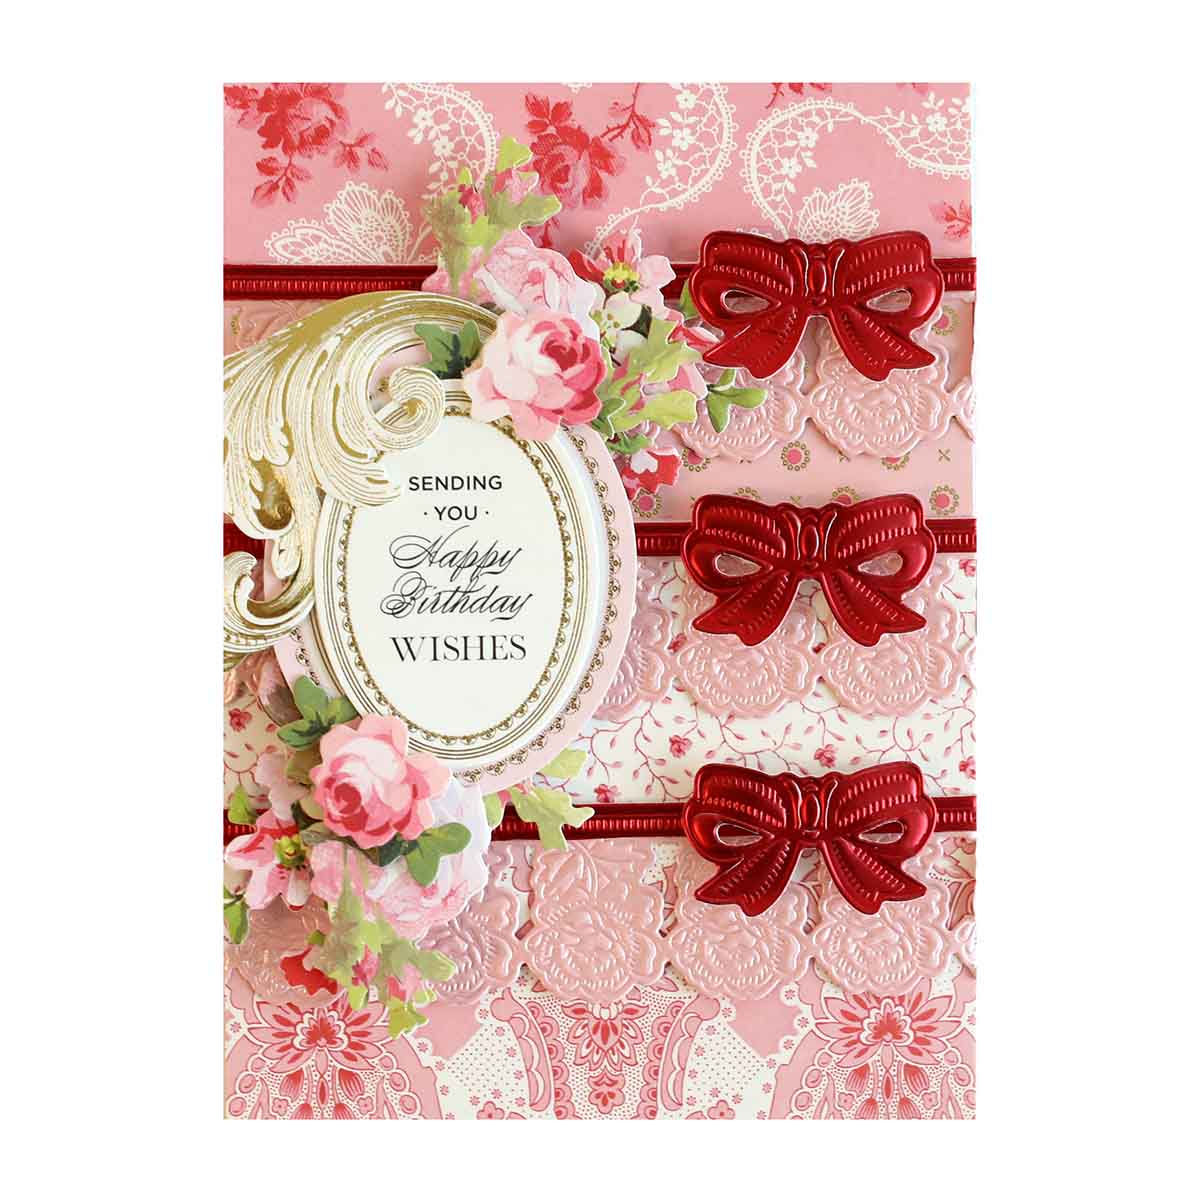 a pink card with red bows and flowers.